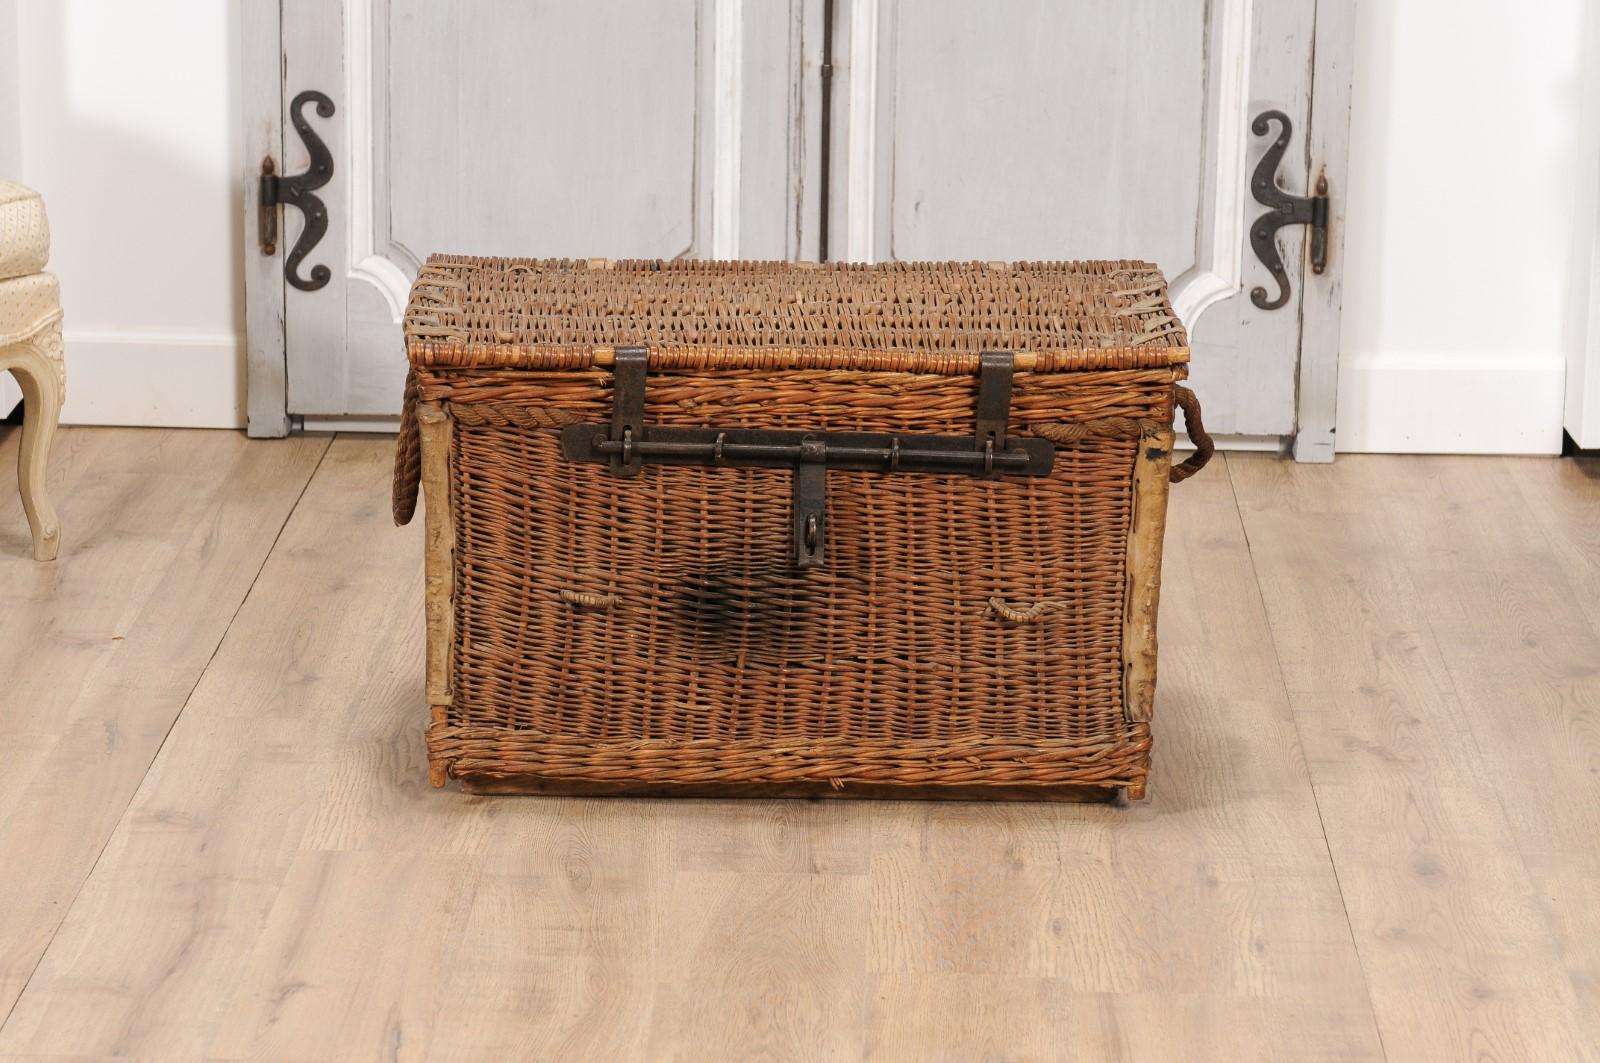 English Rustic 1930s Wicker Trunk with Iron Hardware and Lateral Handles For Sale 7